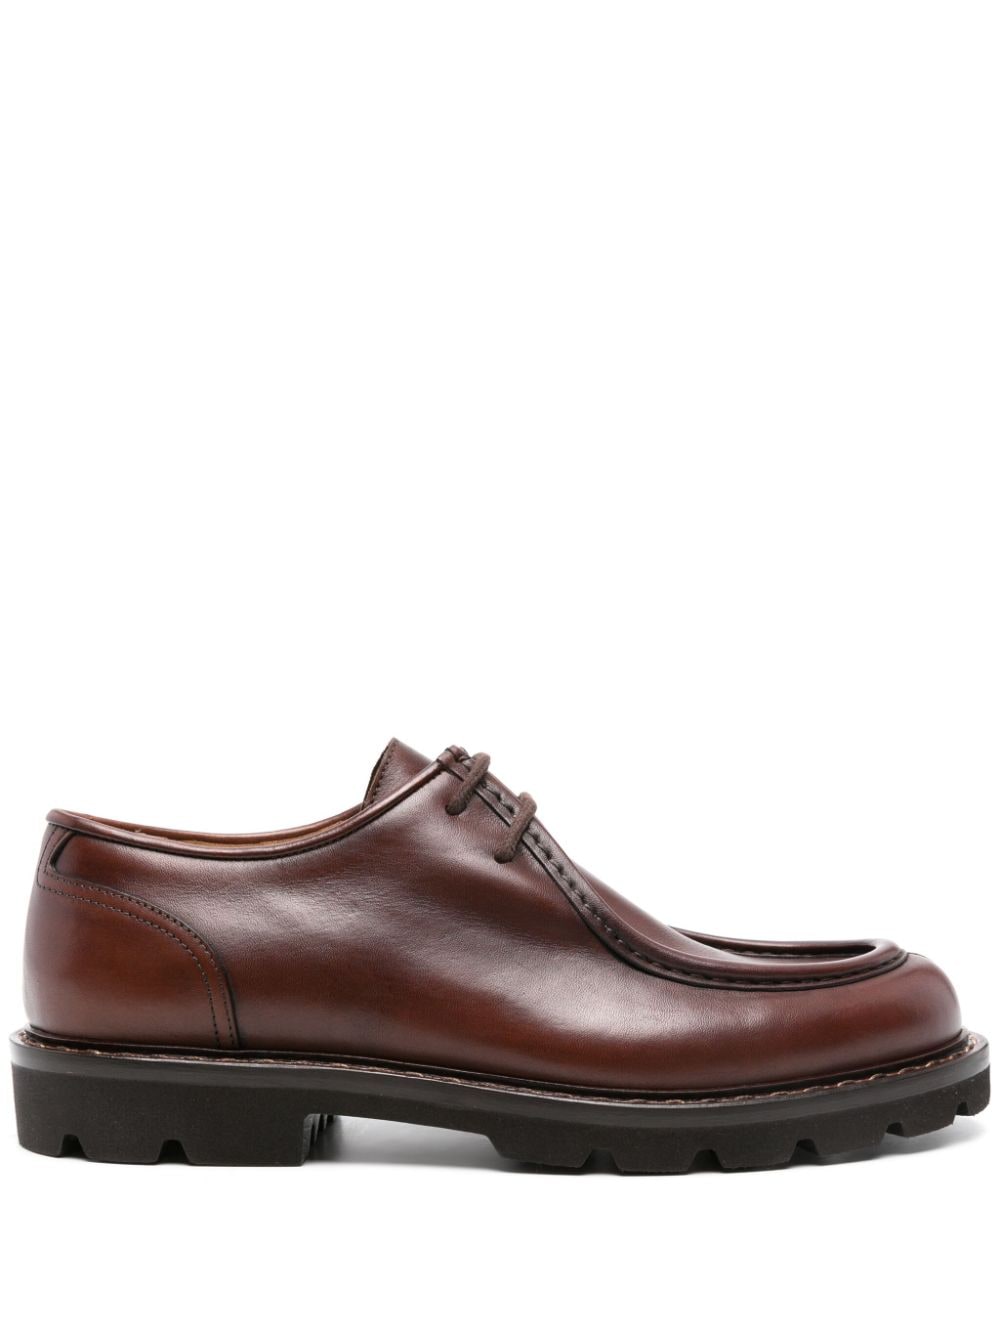 Scarosso Damiano leather Derby shoes - Brown von Scarosso